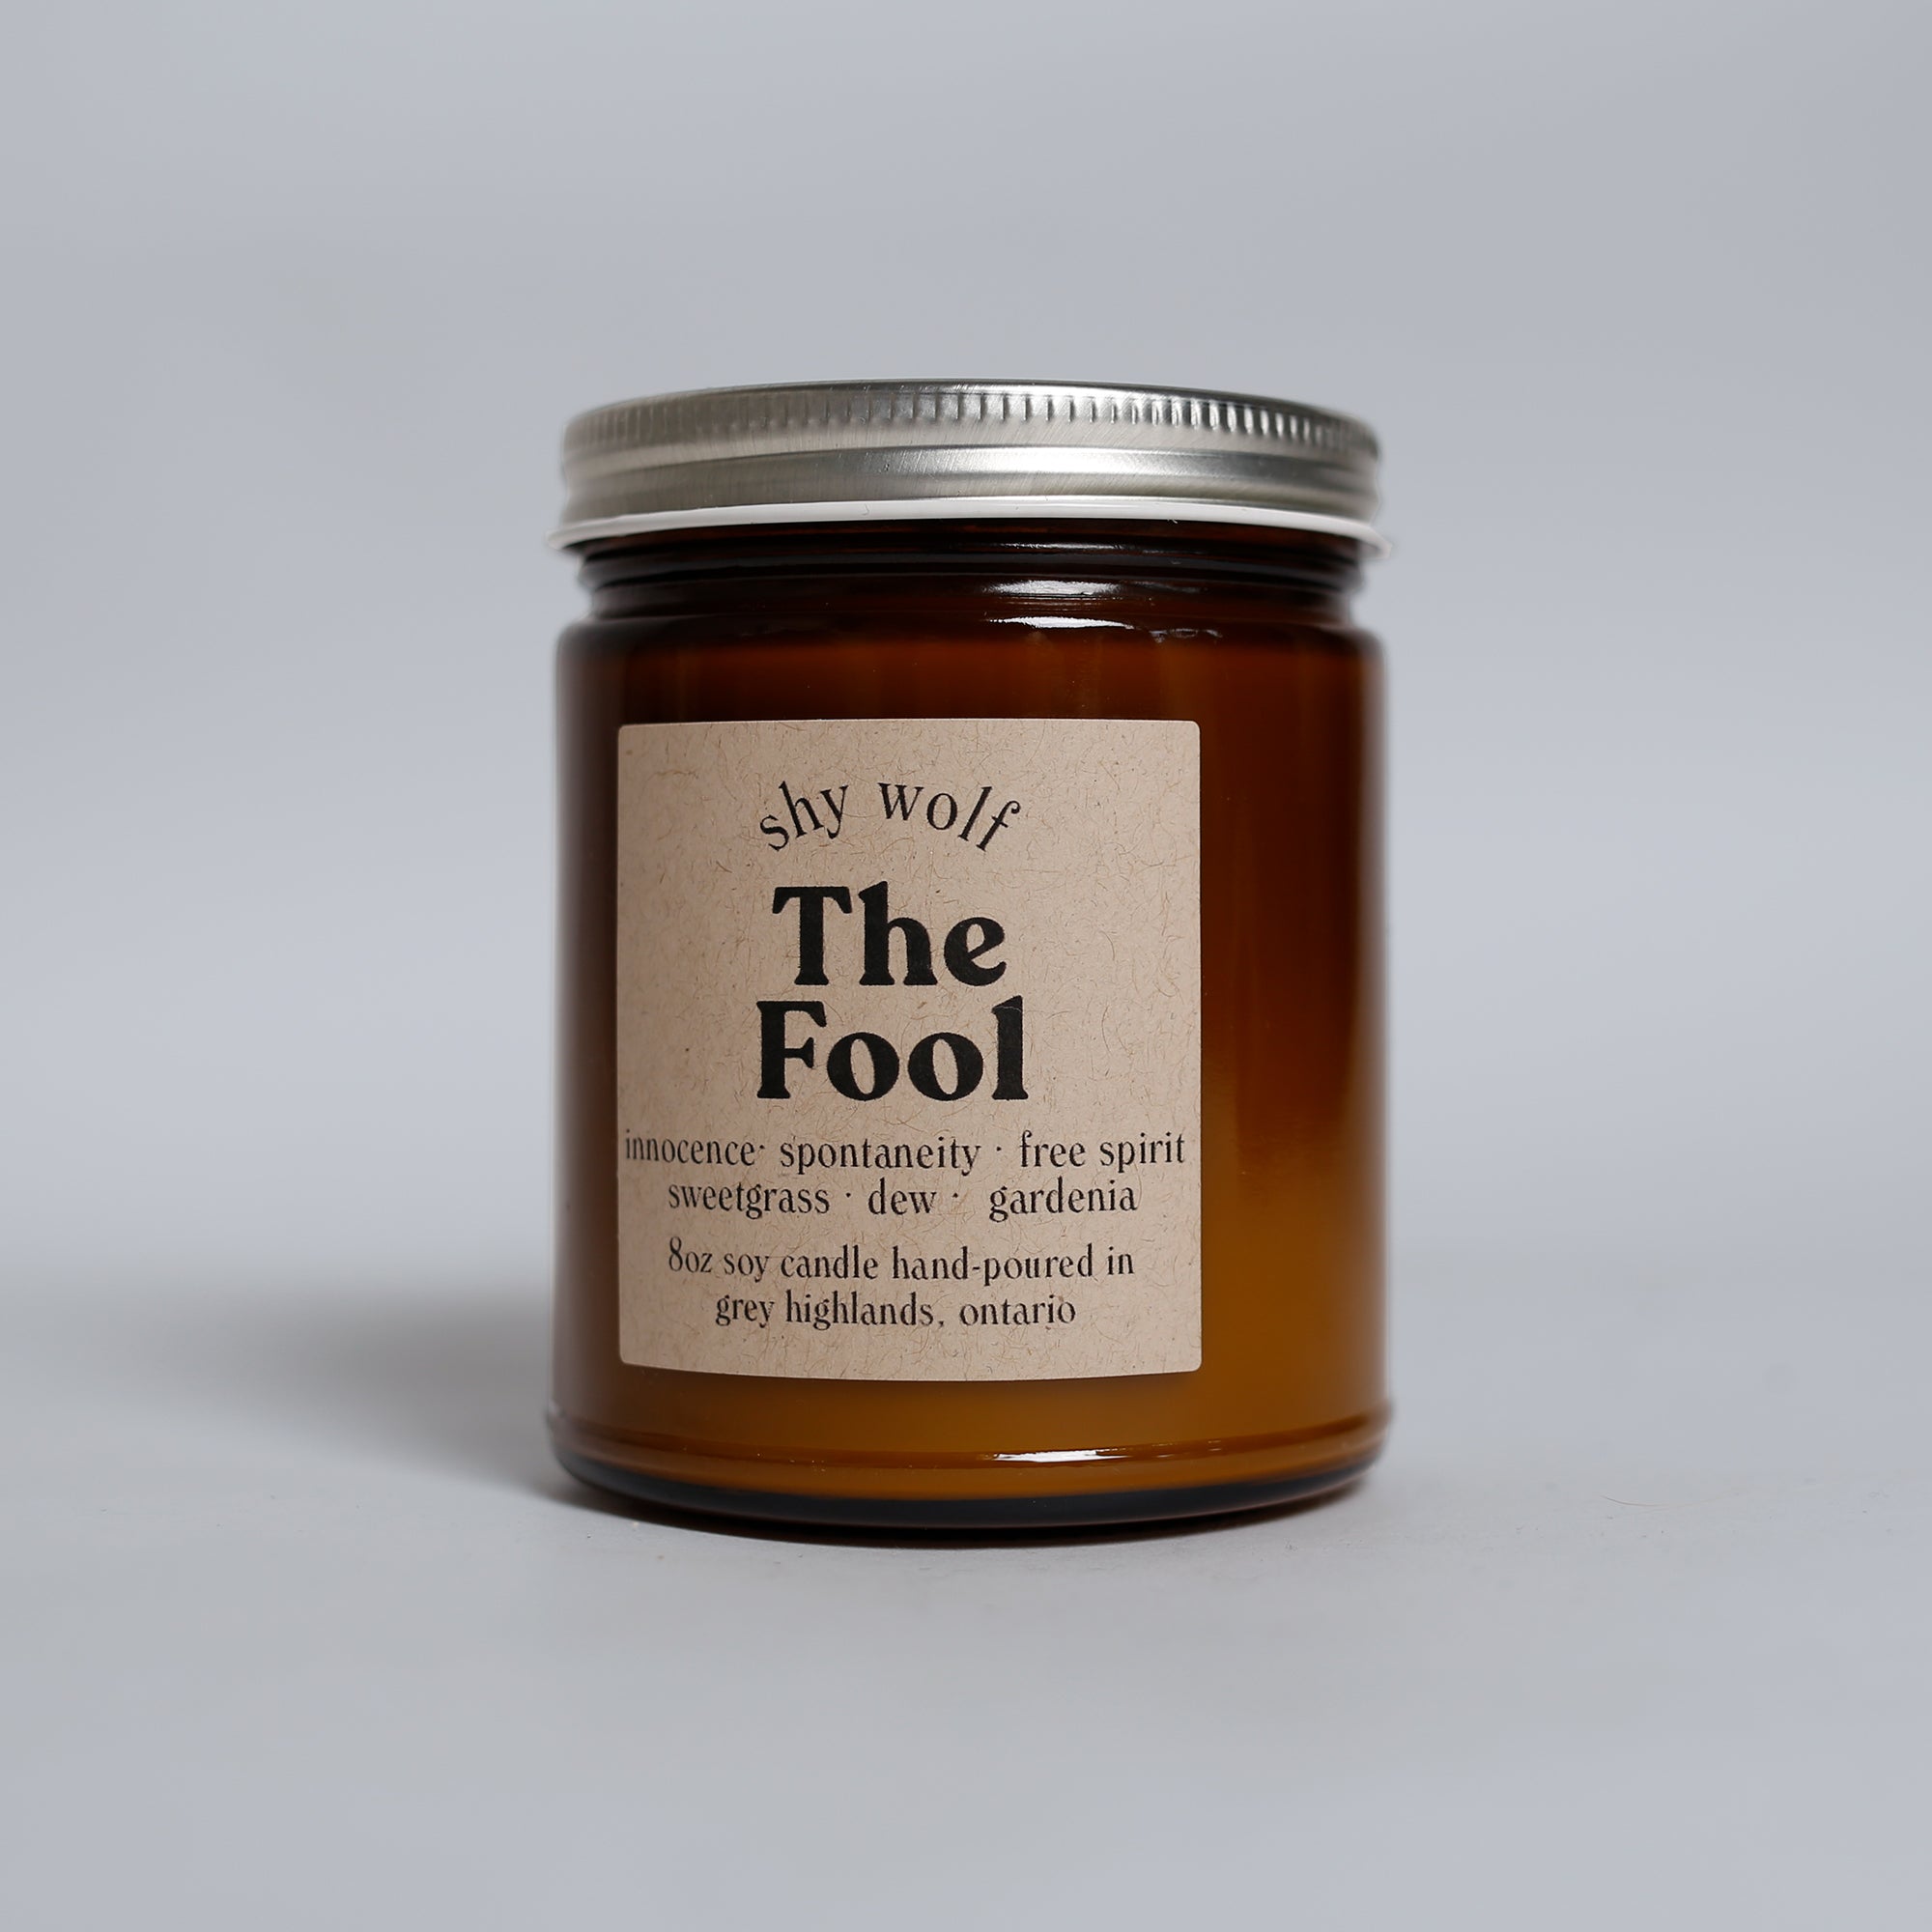 Shy Wolf Candles - The Fool